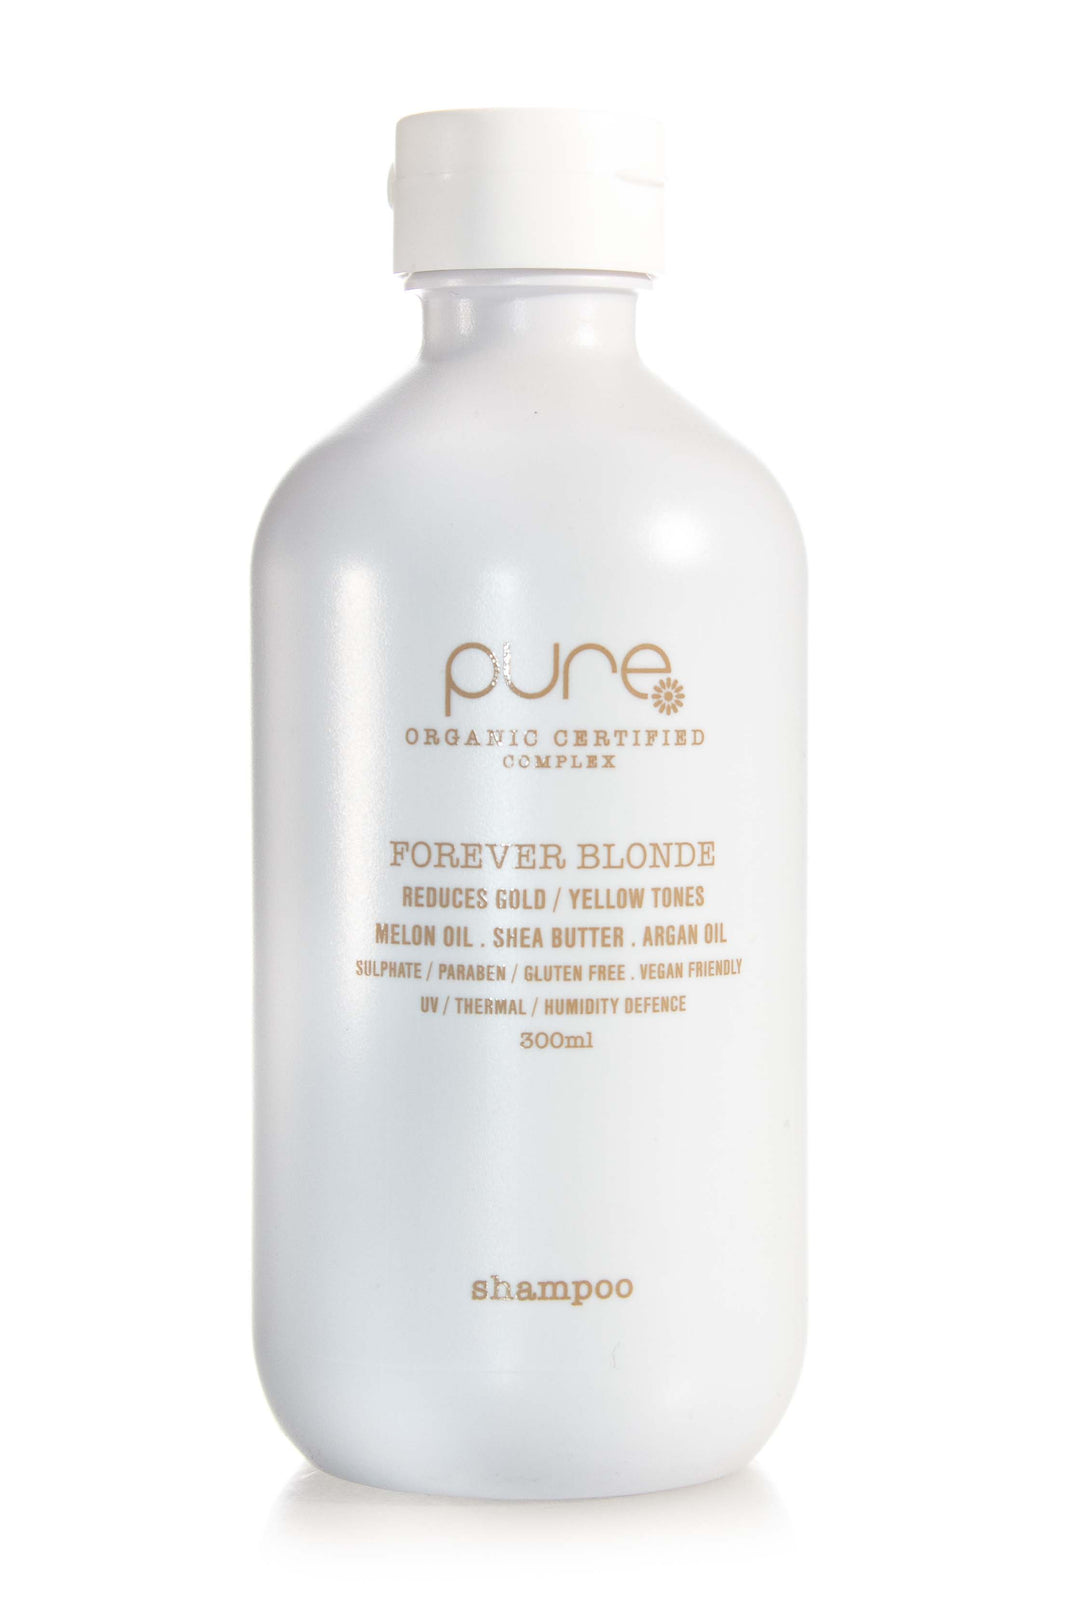 pure-forever-blonde-shampoo-300ml